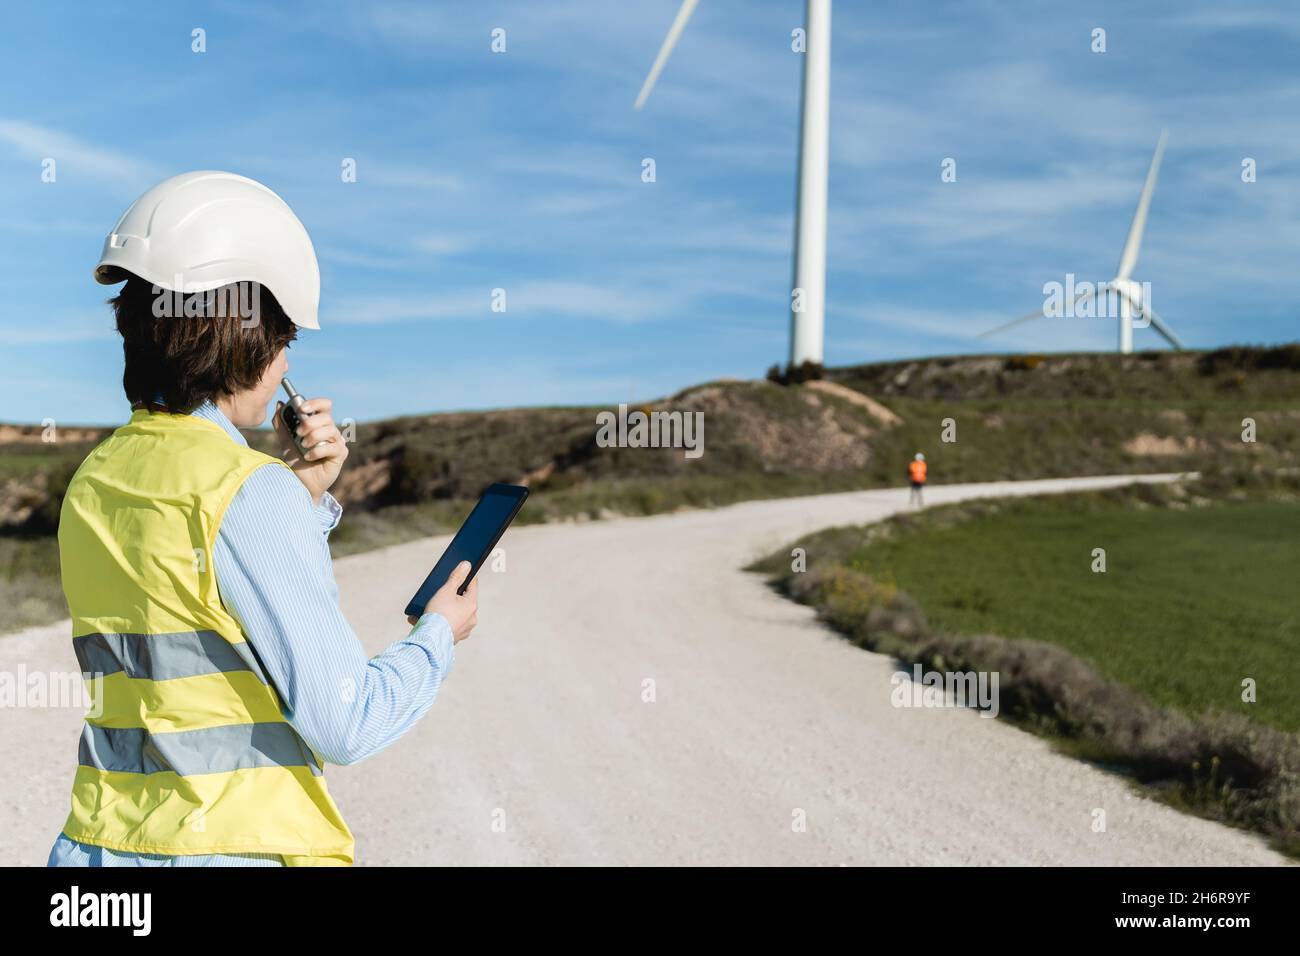 People working at green alternative energy farm with wind turbine power generators on background - Focus on woman back Stock Photo